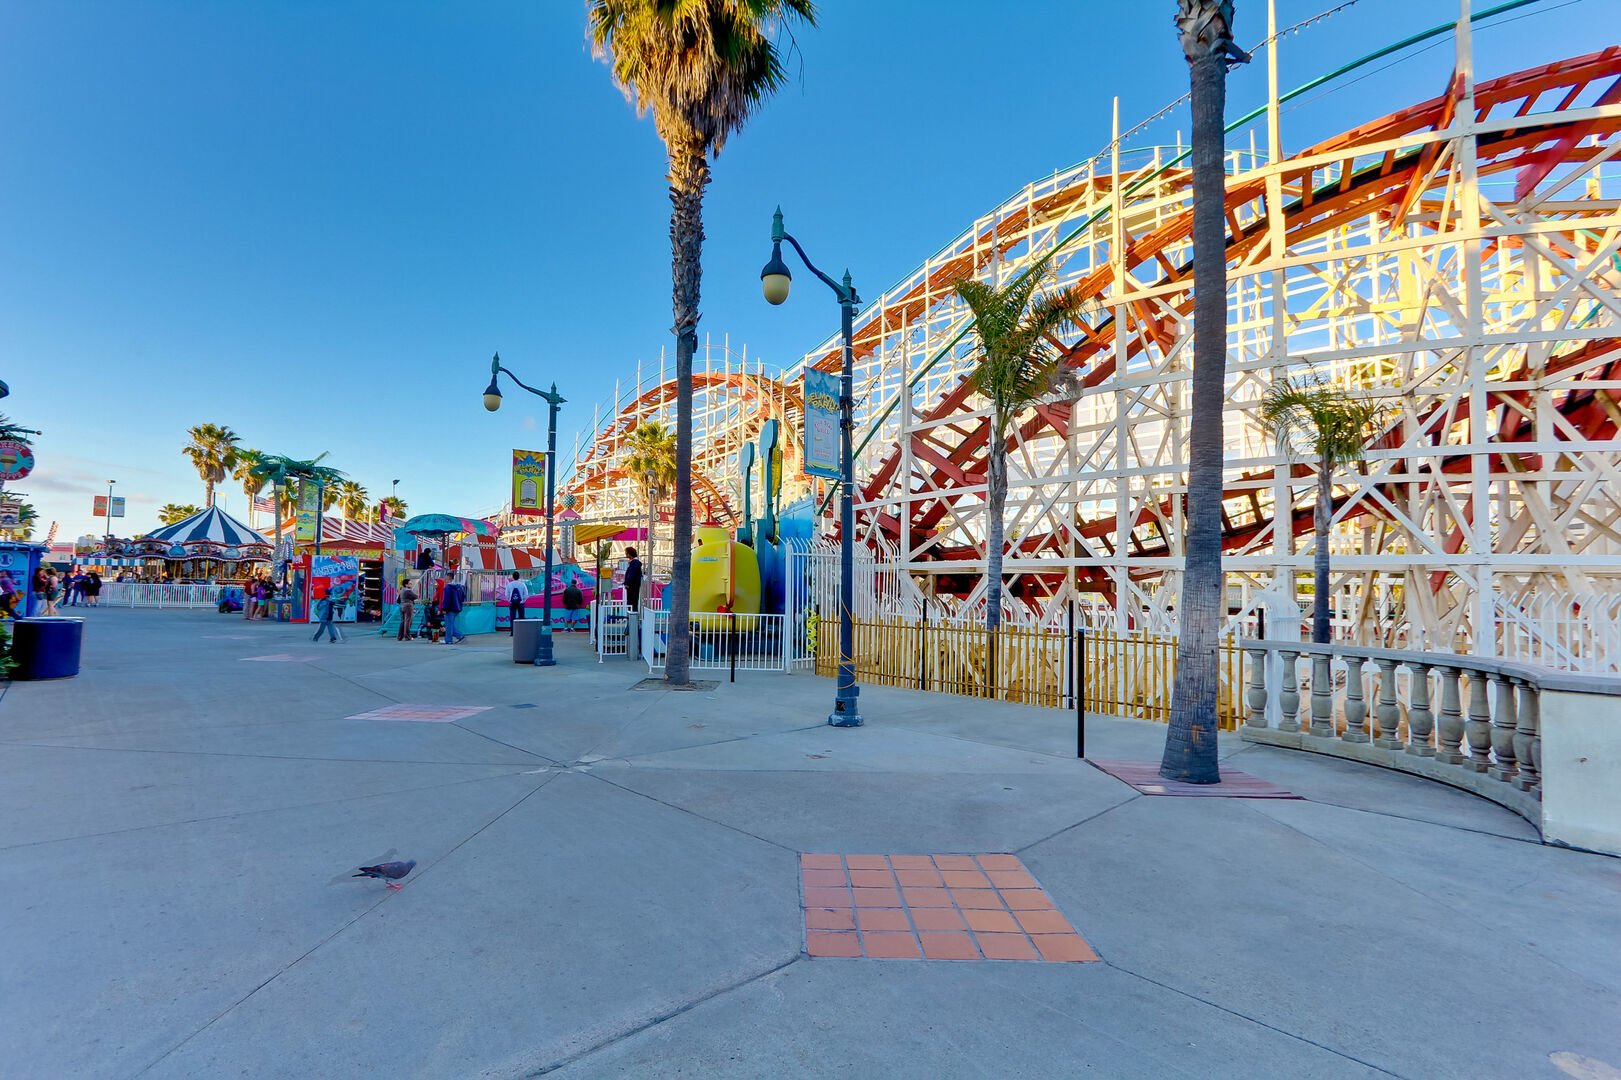 Belmont Amusement Park is the local attraction of Mission Beach and is located just south of Pete's Mission Beach Getaway